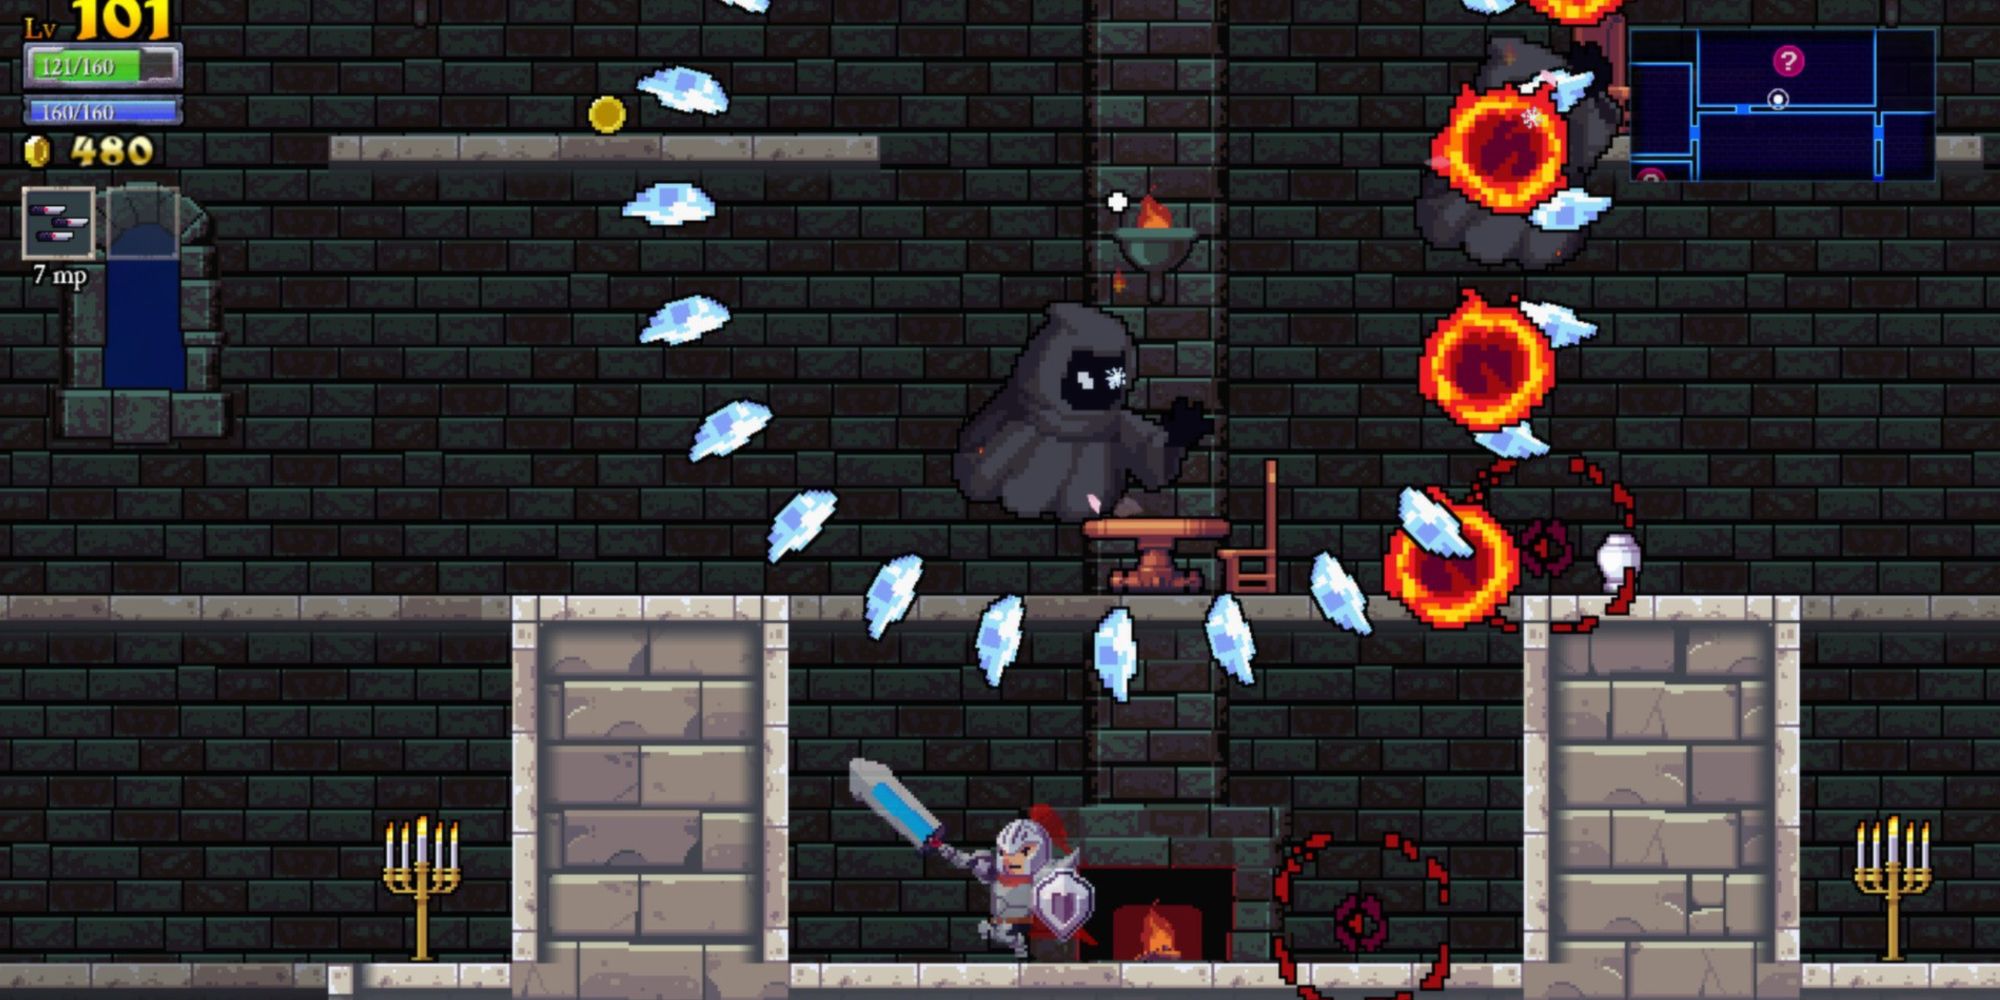 Knight fighting enemies in the castle in Rogue Legacy